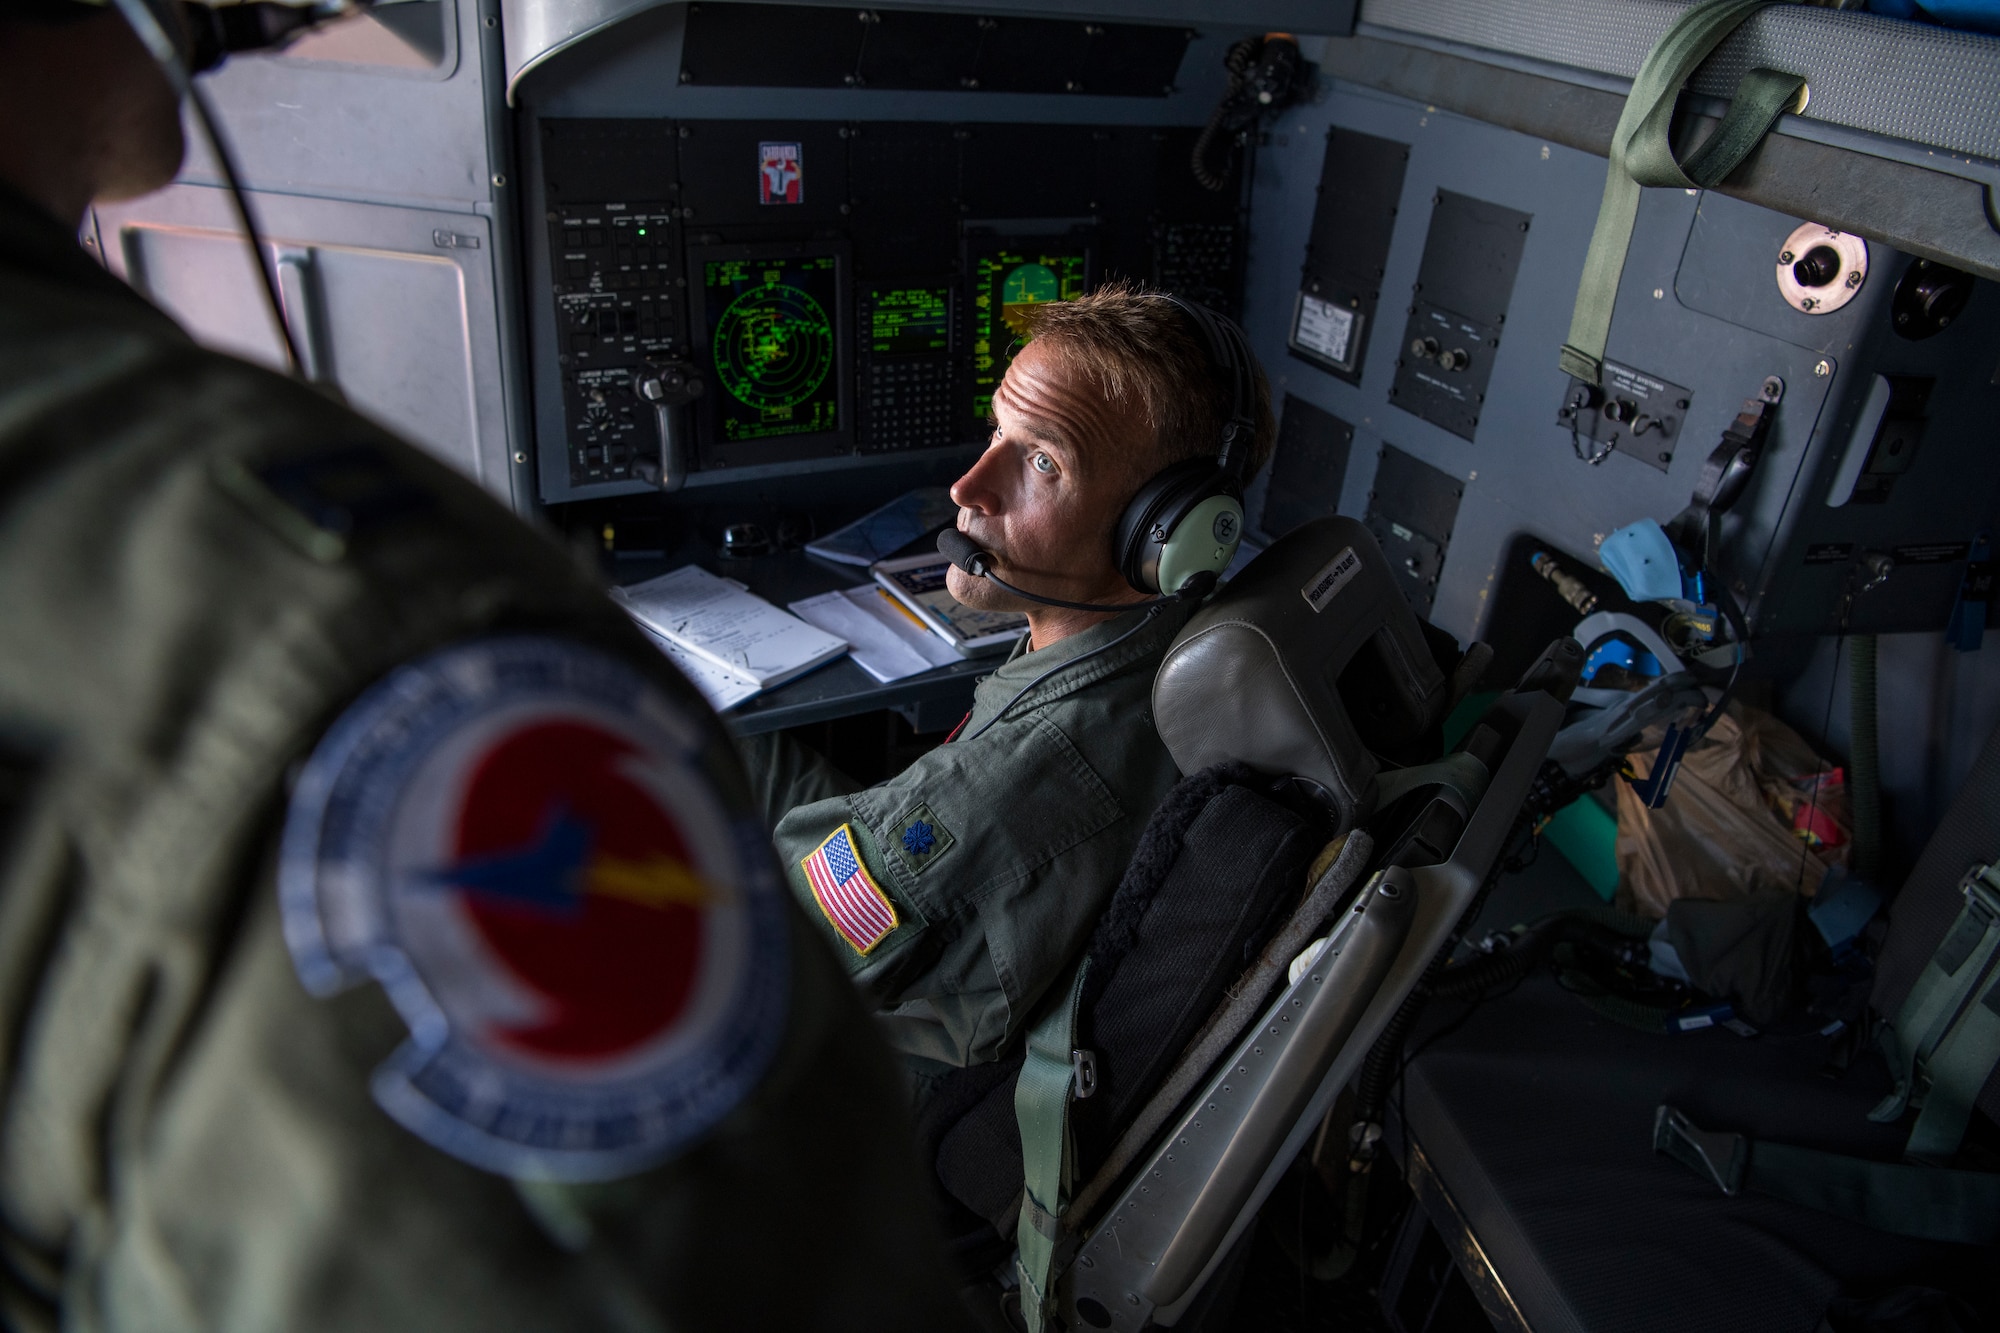 Lt. Col. Phillip Dobson, 53rd Weather Reconnaissance Squadron navigator, explains the duties of a navigator to Capt. Garrett Black, 53rd WRS aerial reconnaissance weather officer during a flight, June 17 over Caribbean. The Hurricane Hunters deployed to St. Croix to fly training missions over the Caribbean in preparation for the 2020 hurricane season. (U.S. Air Force photo by Tech. Sgt. Christopher Carranza)